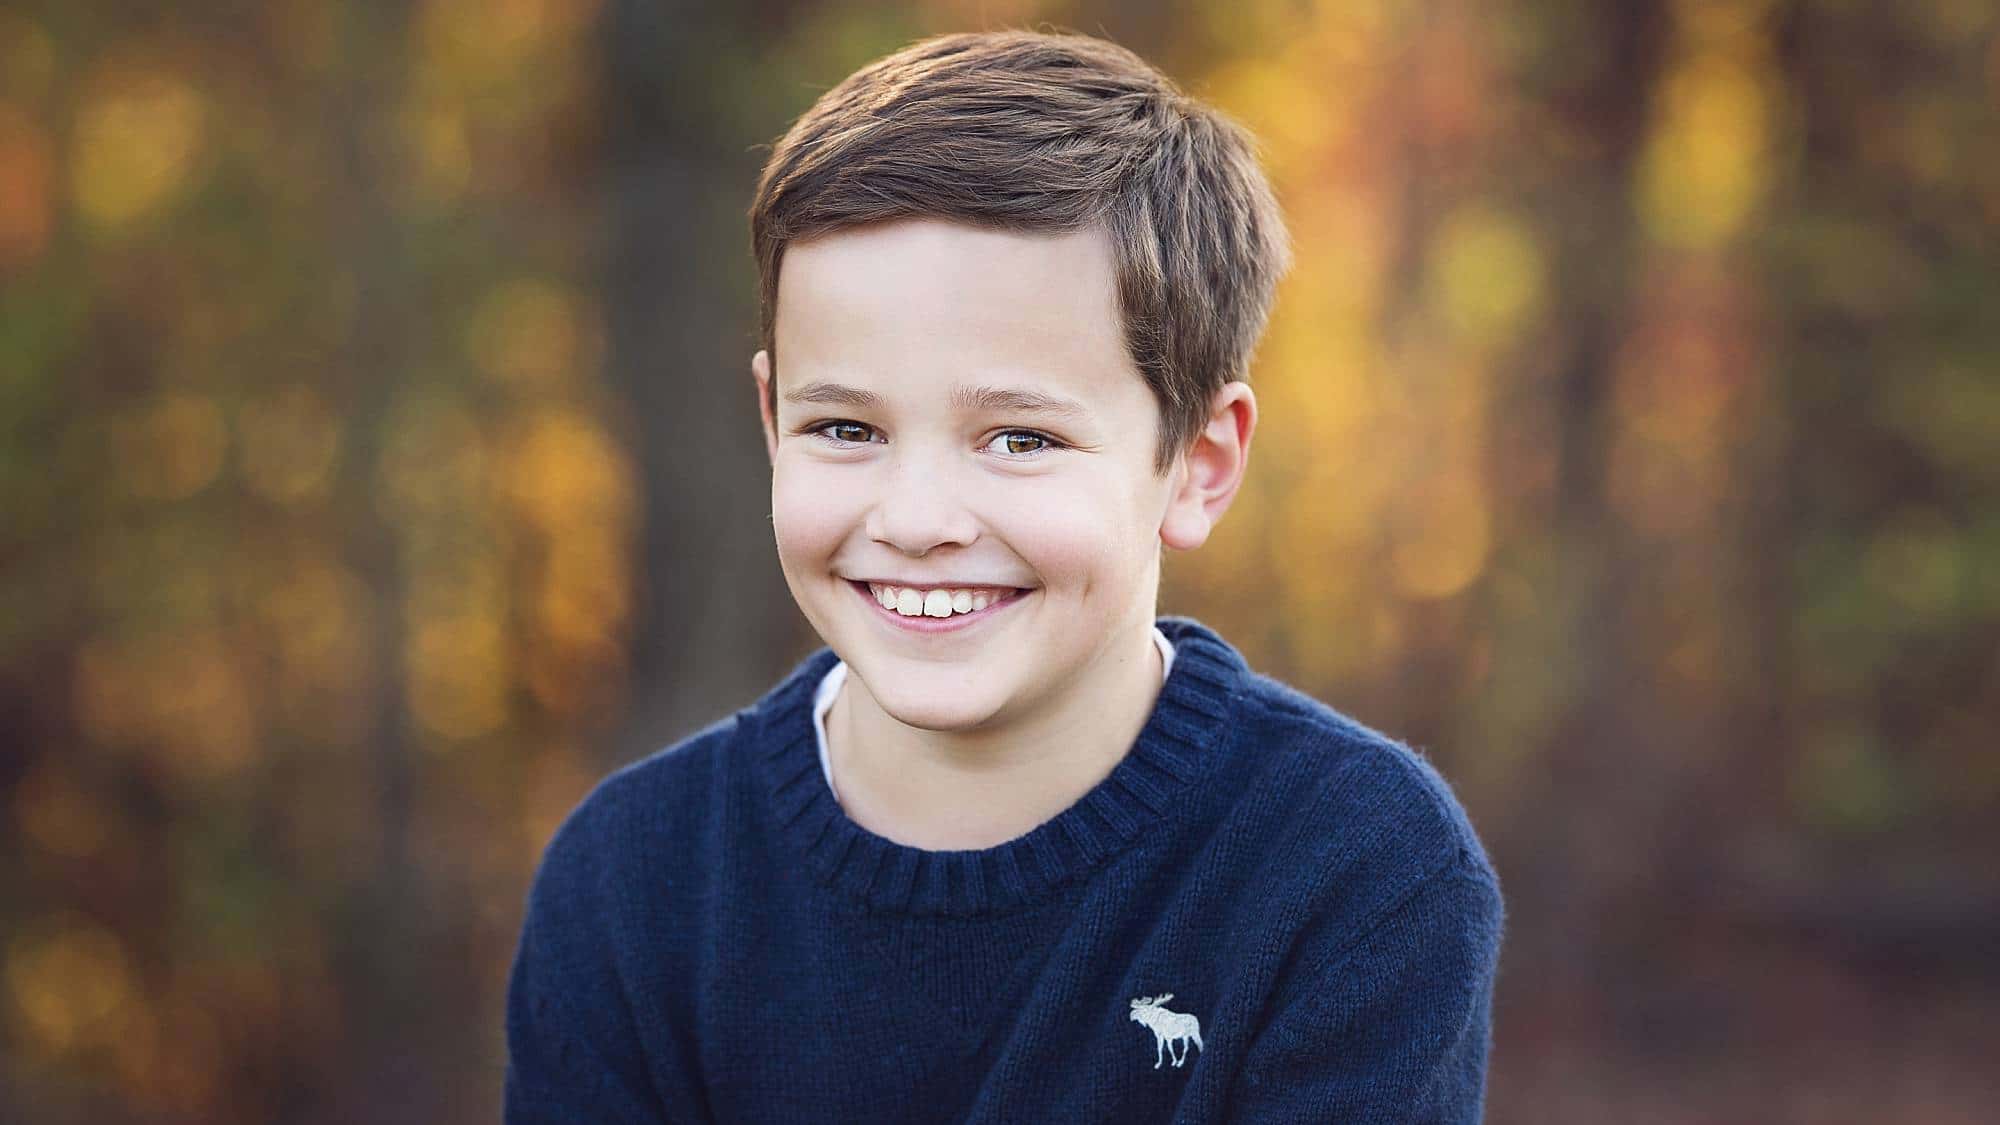 image of a young boy grinning, wearing a navy blue sweater with fall trees in the background